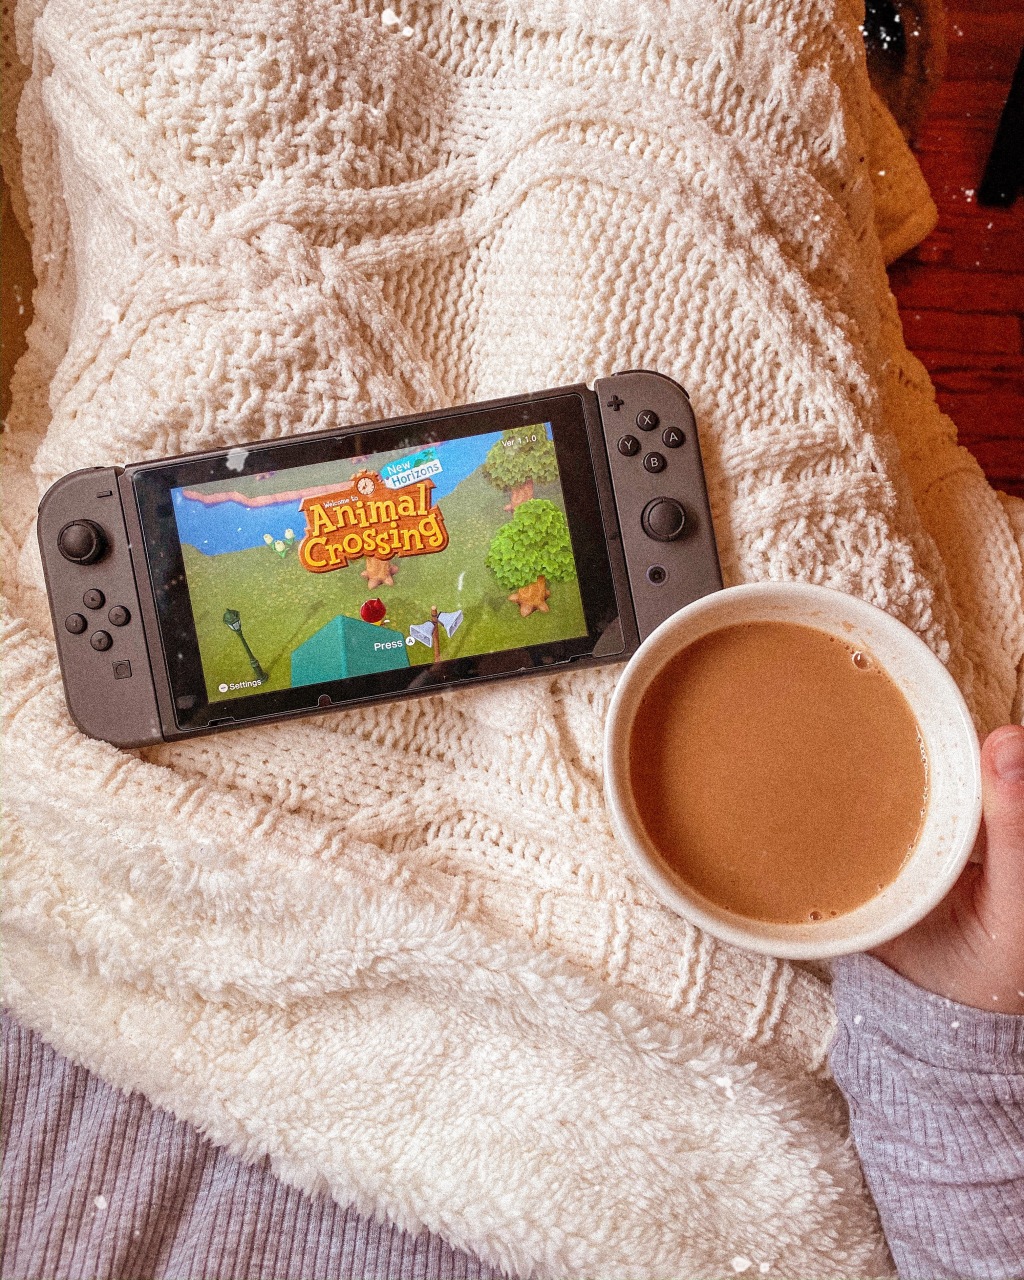 10 Must-Play Cozy Games to Relax and Unwind on Your Nintendo Switch